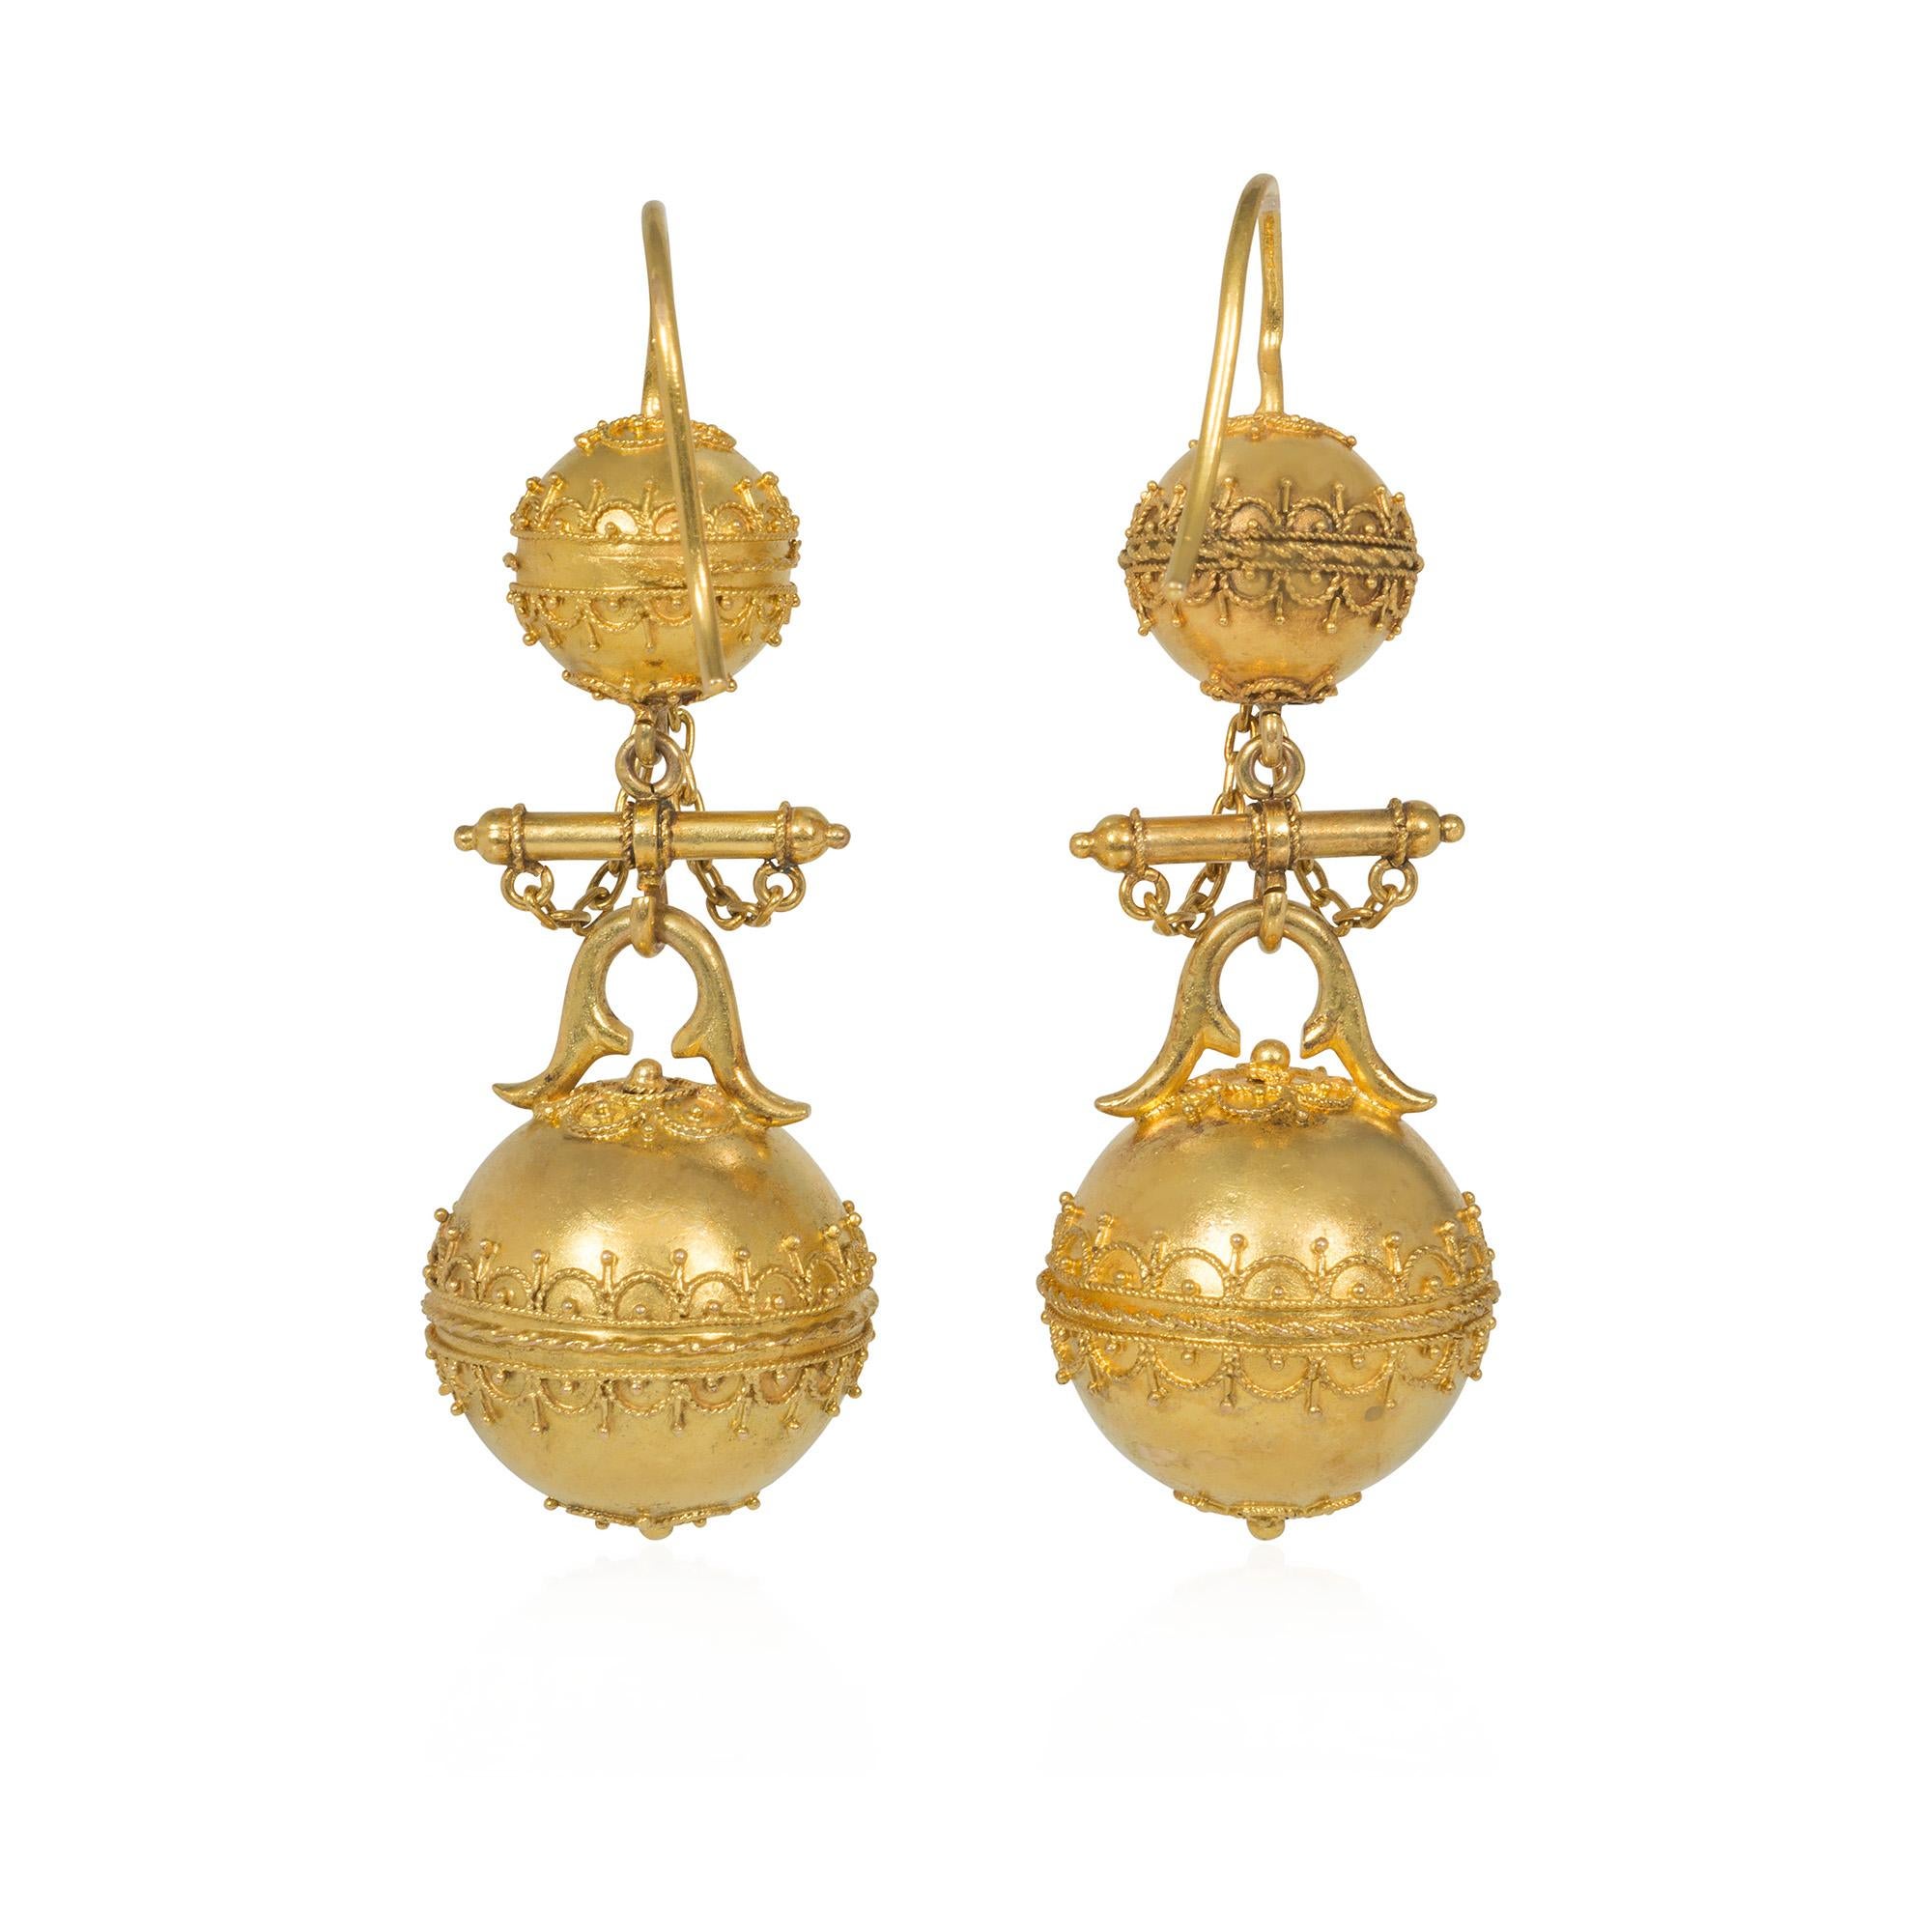 Victorian Antique Etruscan Revival Gold Bead and Wirework Pendant Earrings For Sale